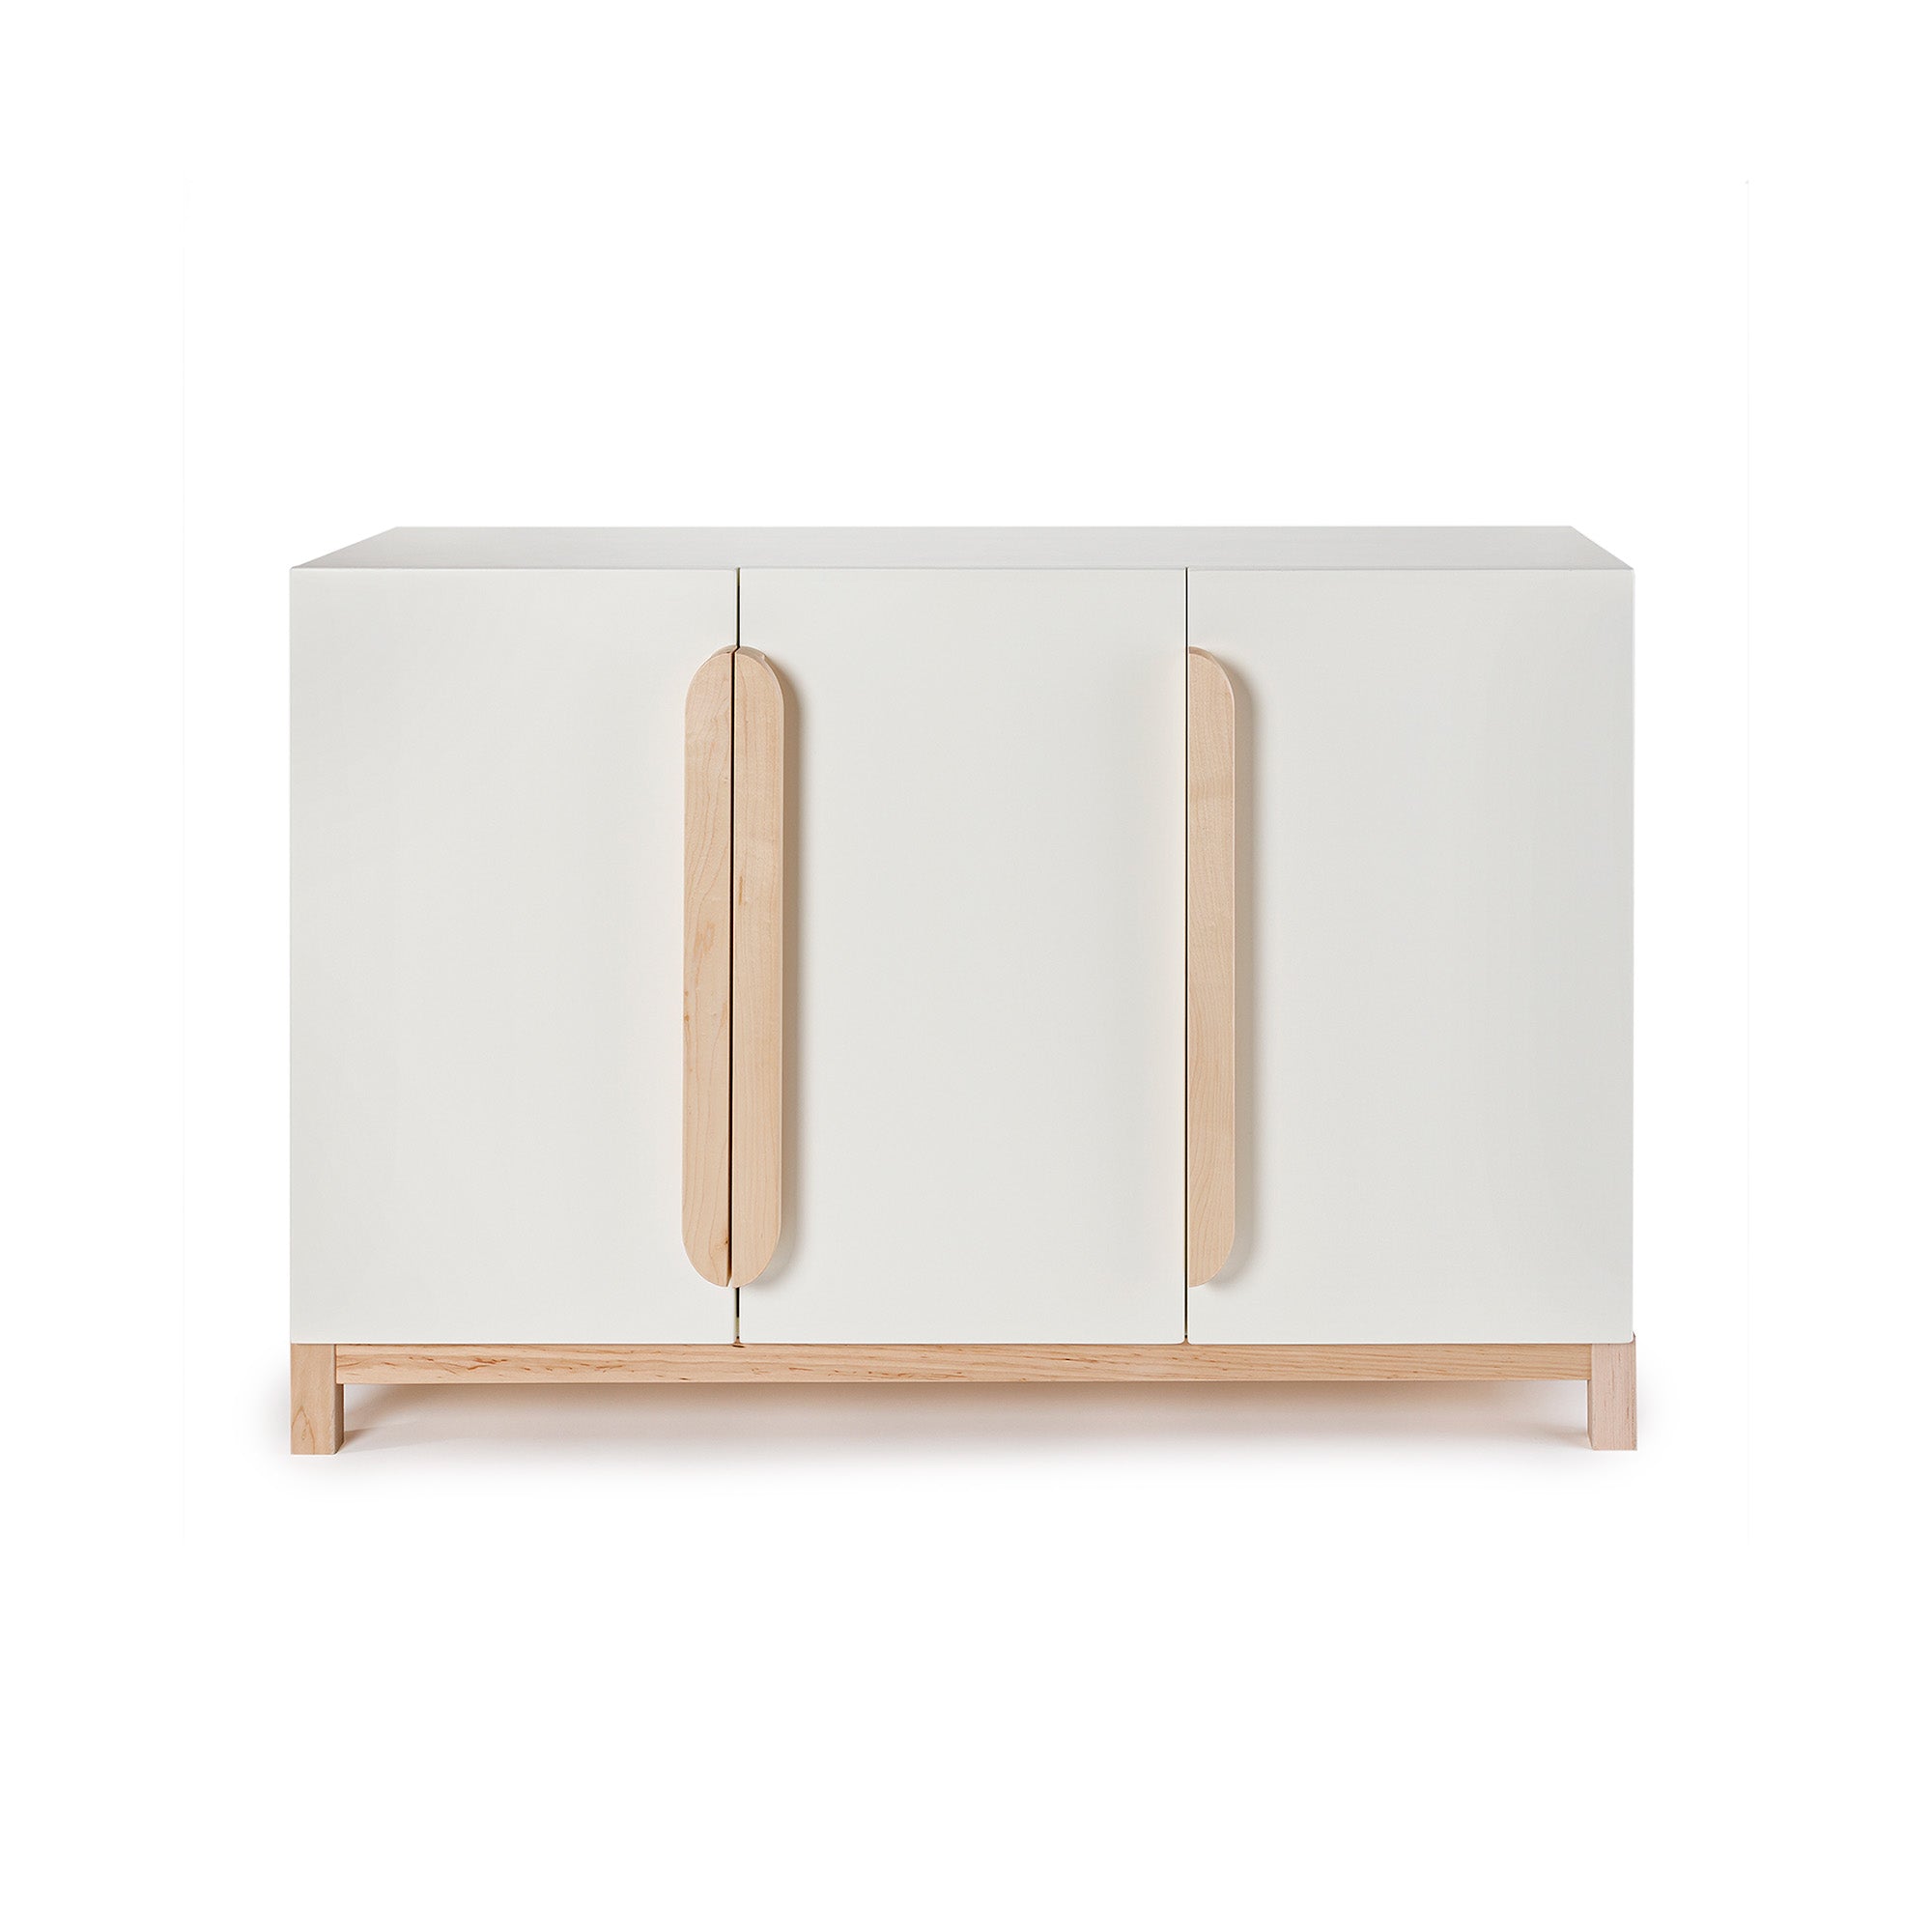 Playroom storage console in white. Built with solid wood and non-toxic finishes. Features 3 soft close doors and adjustable shelf.